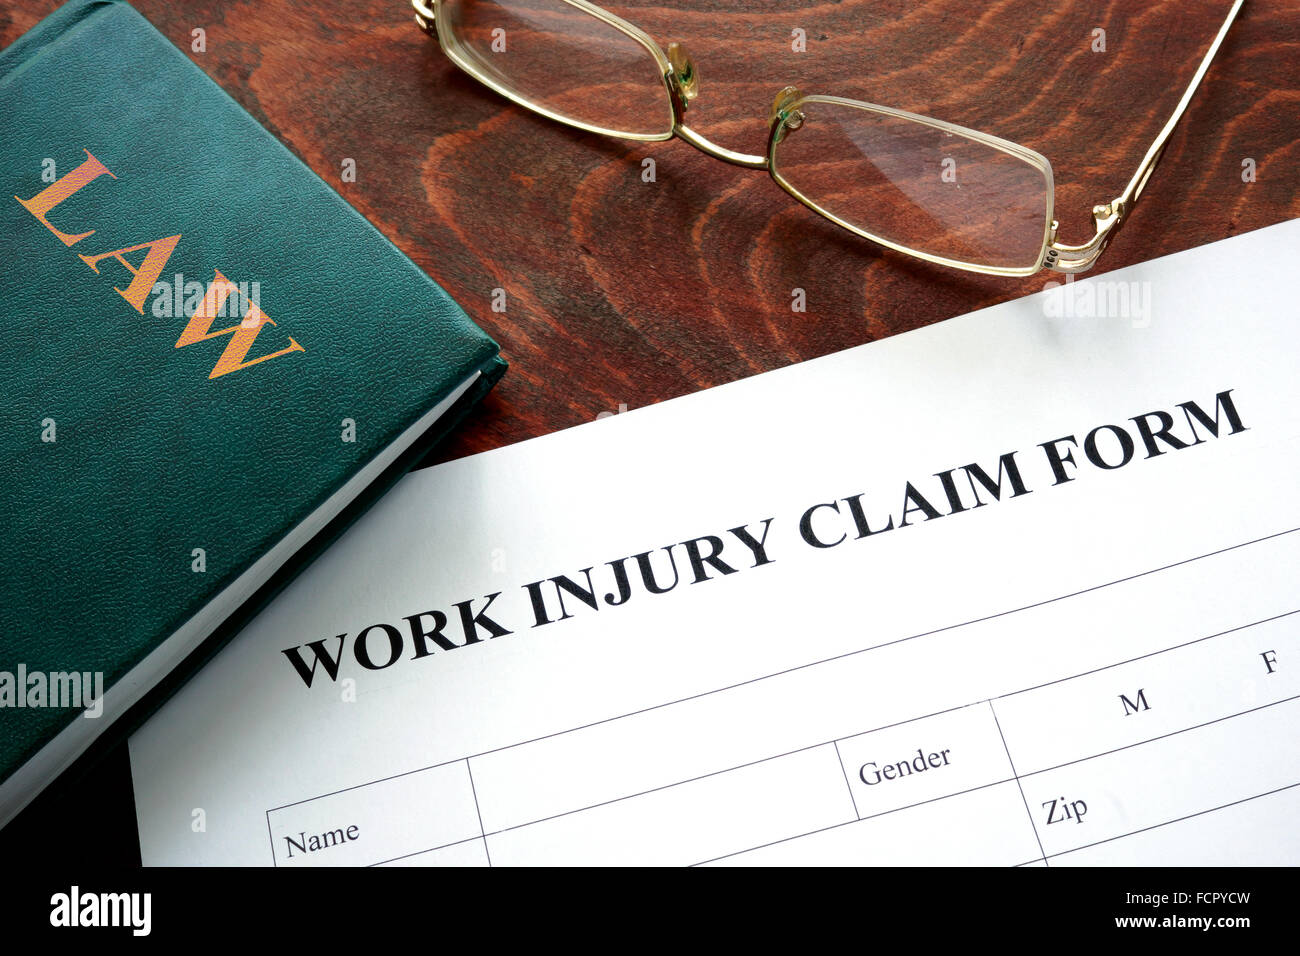 Work injury claim form on a wooden table. Stock Photo